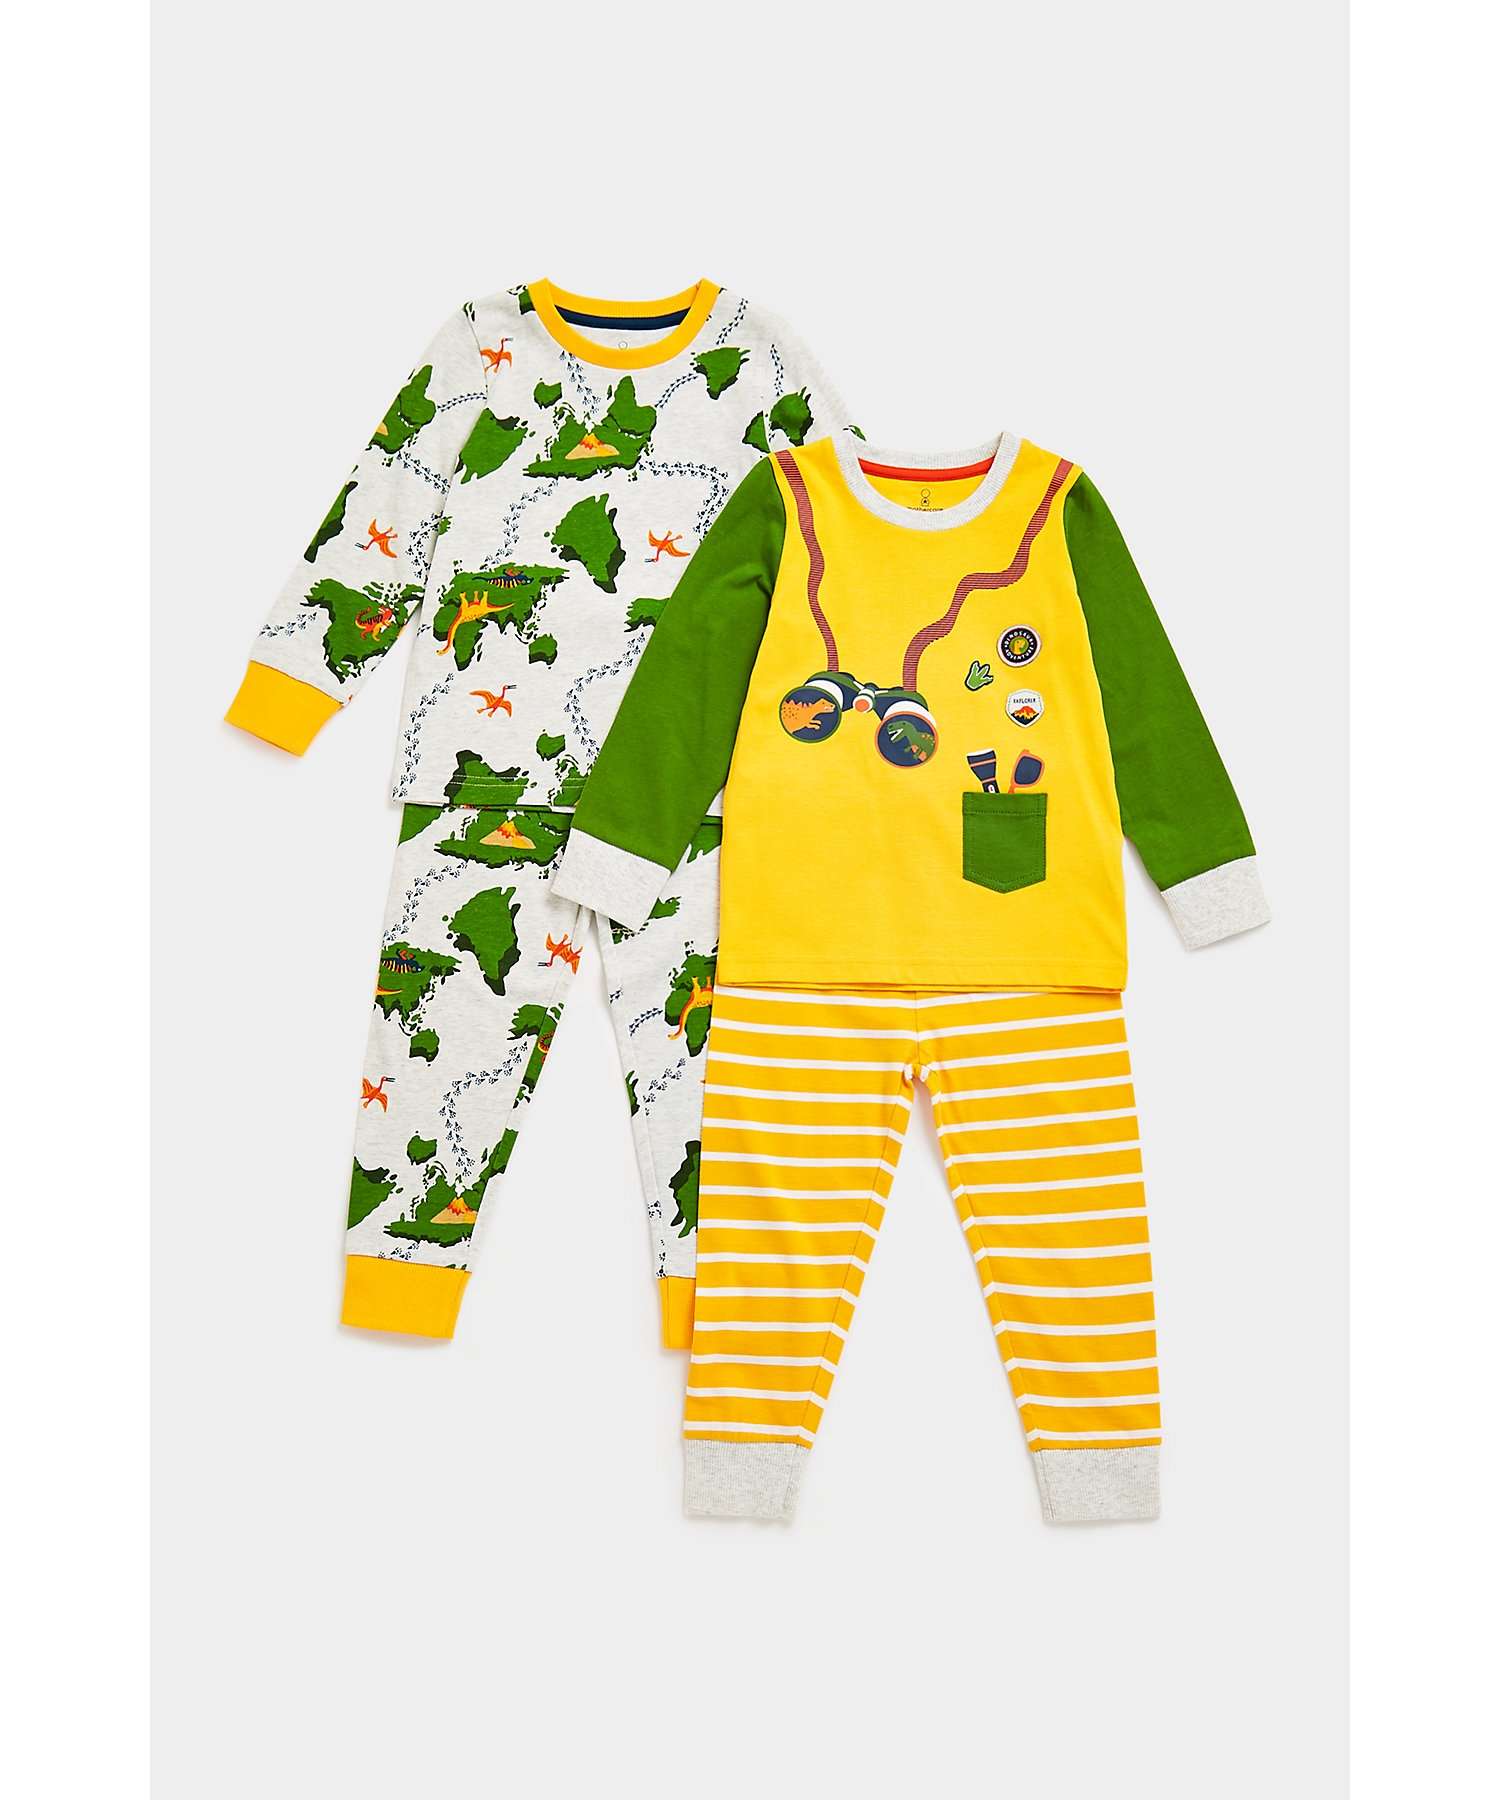 Mothercare | Boys Full Sleeves Pyjama Sets -Pack of 2-Multicolor